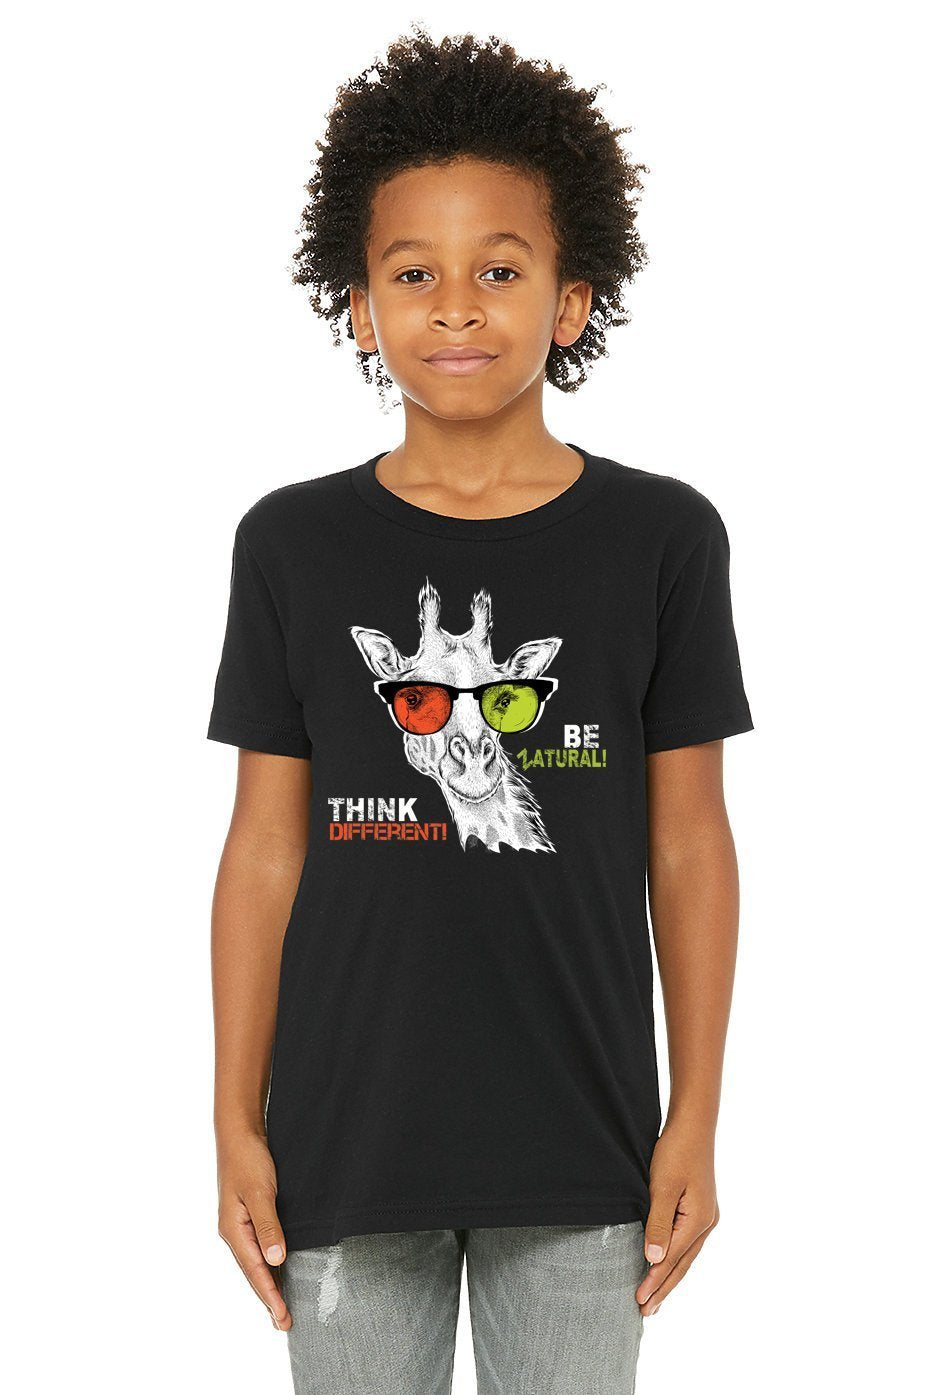 'Think Different' Giraffe Youth Graphic